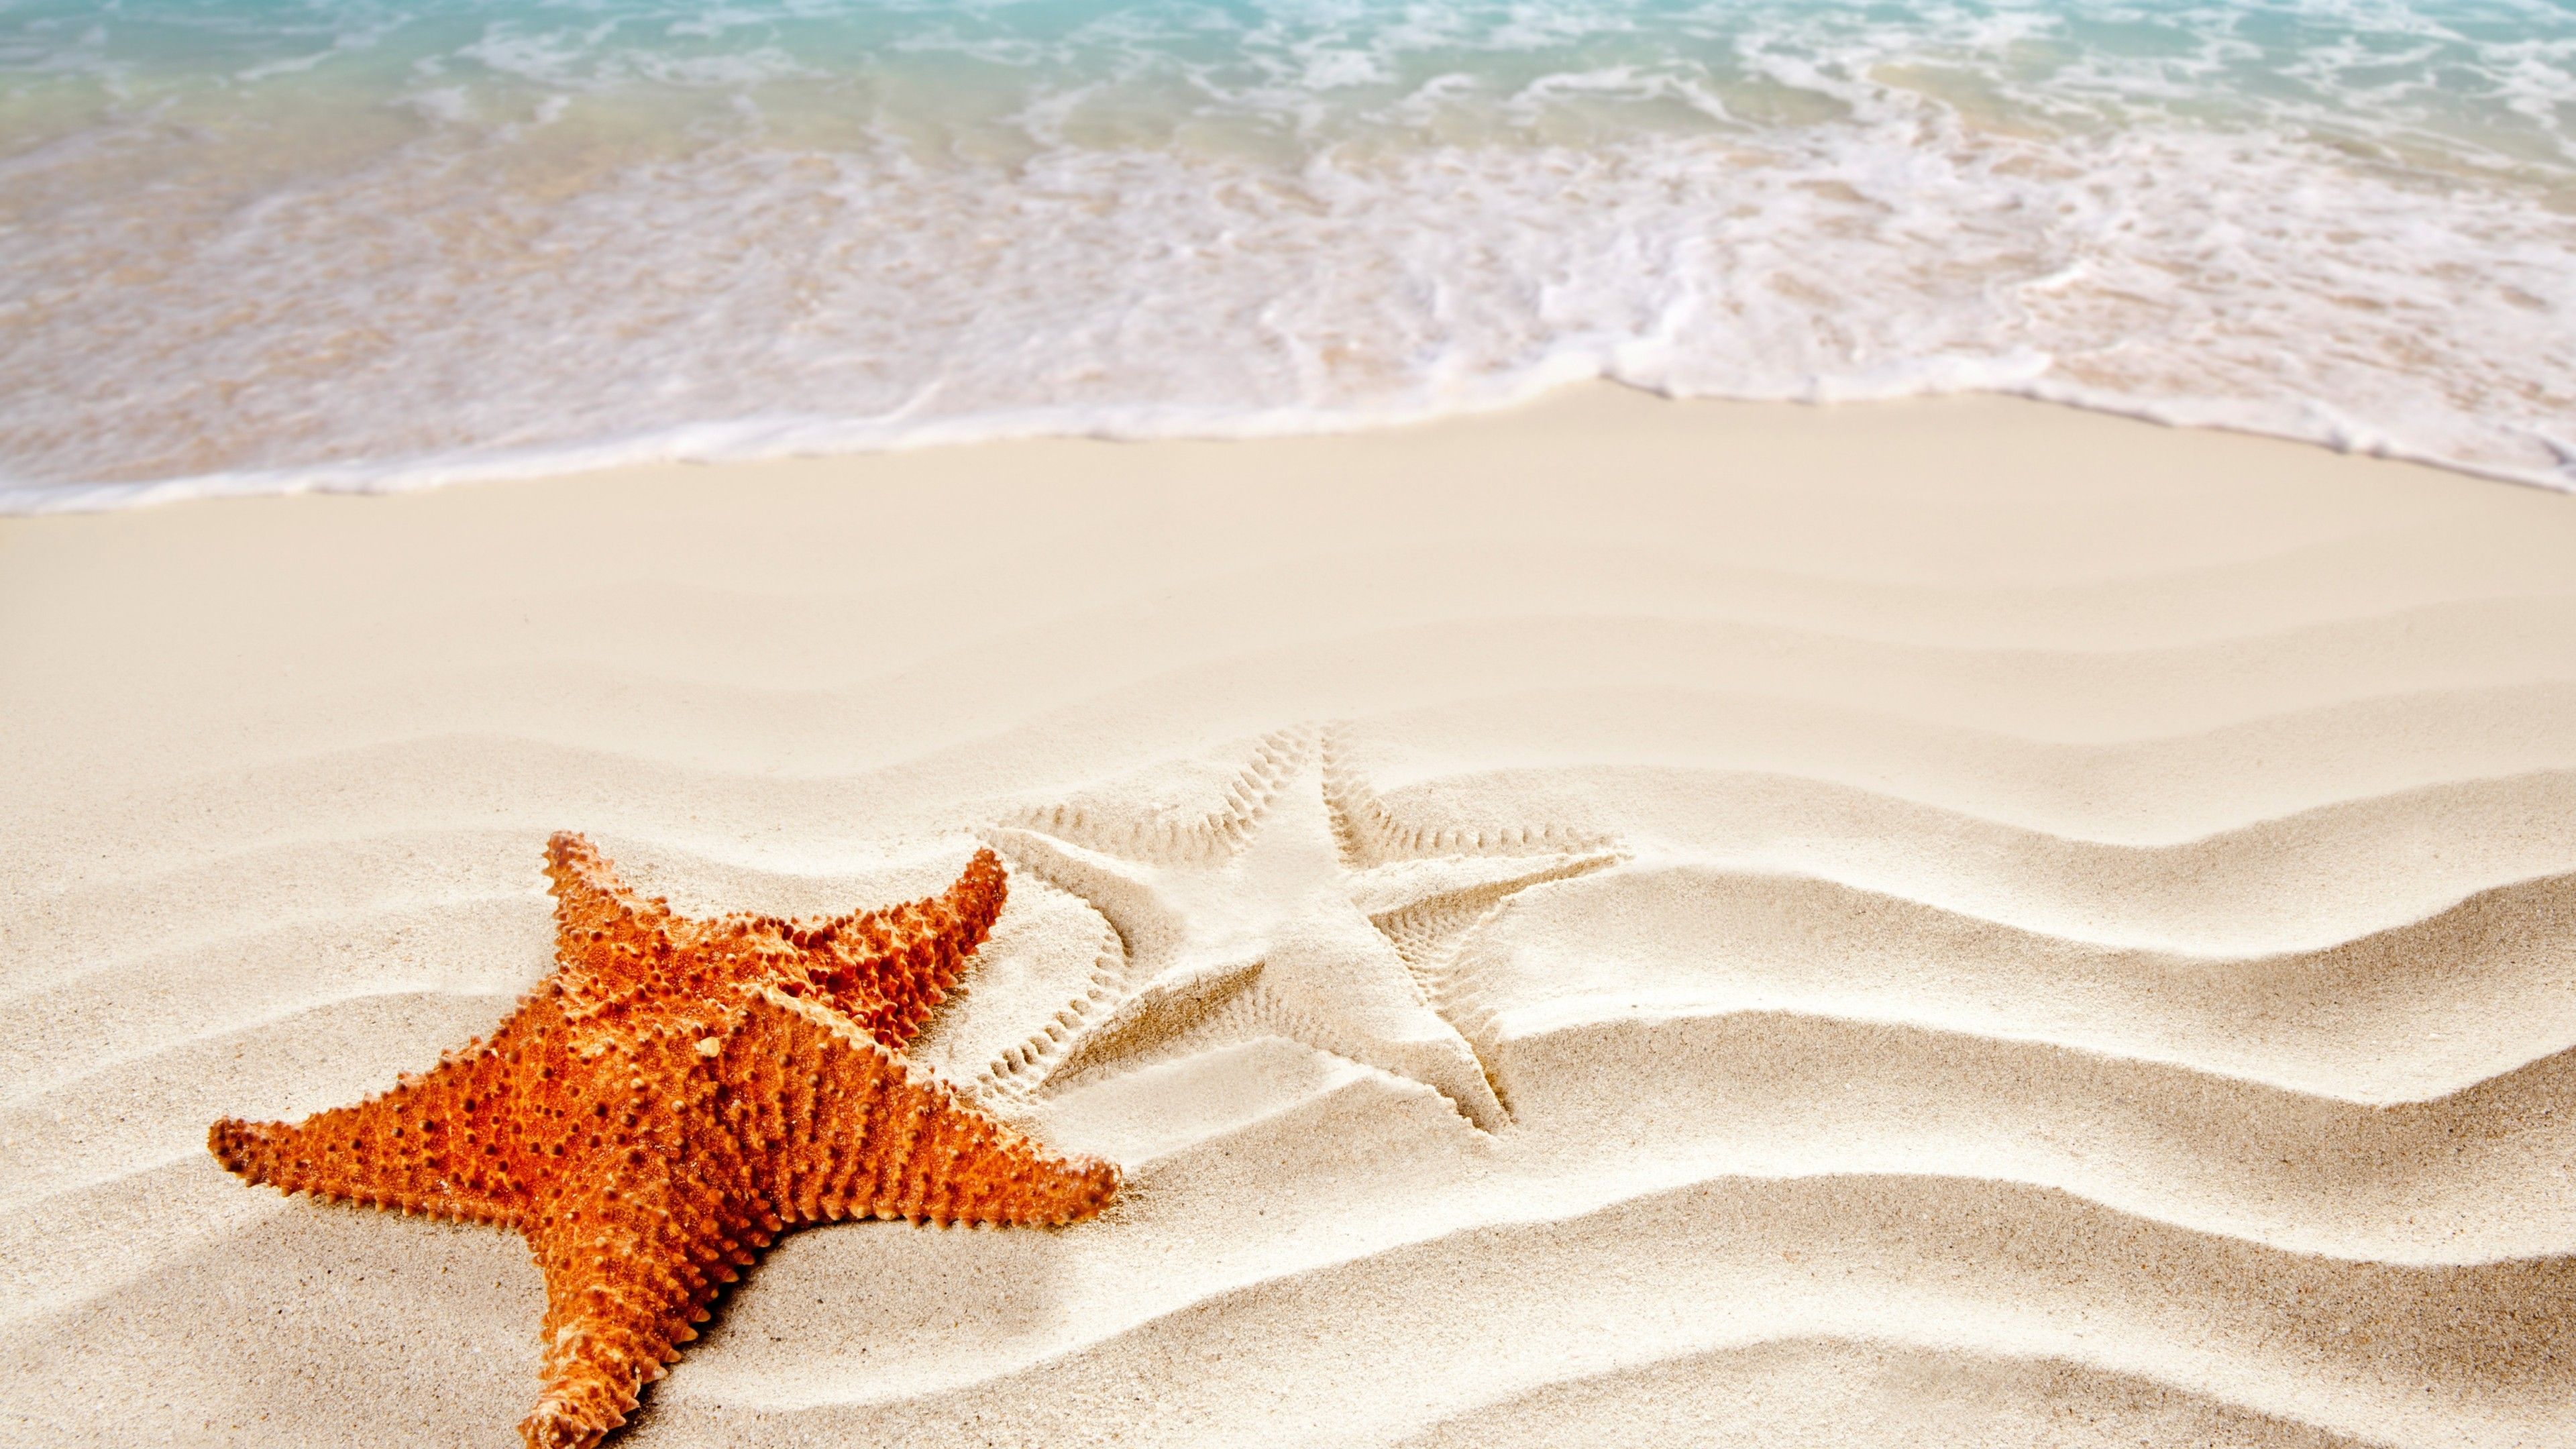 Two starfish on the beach with the ocean in the background - Starfish